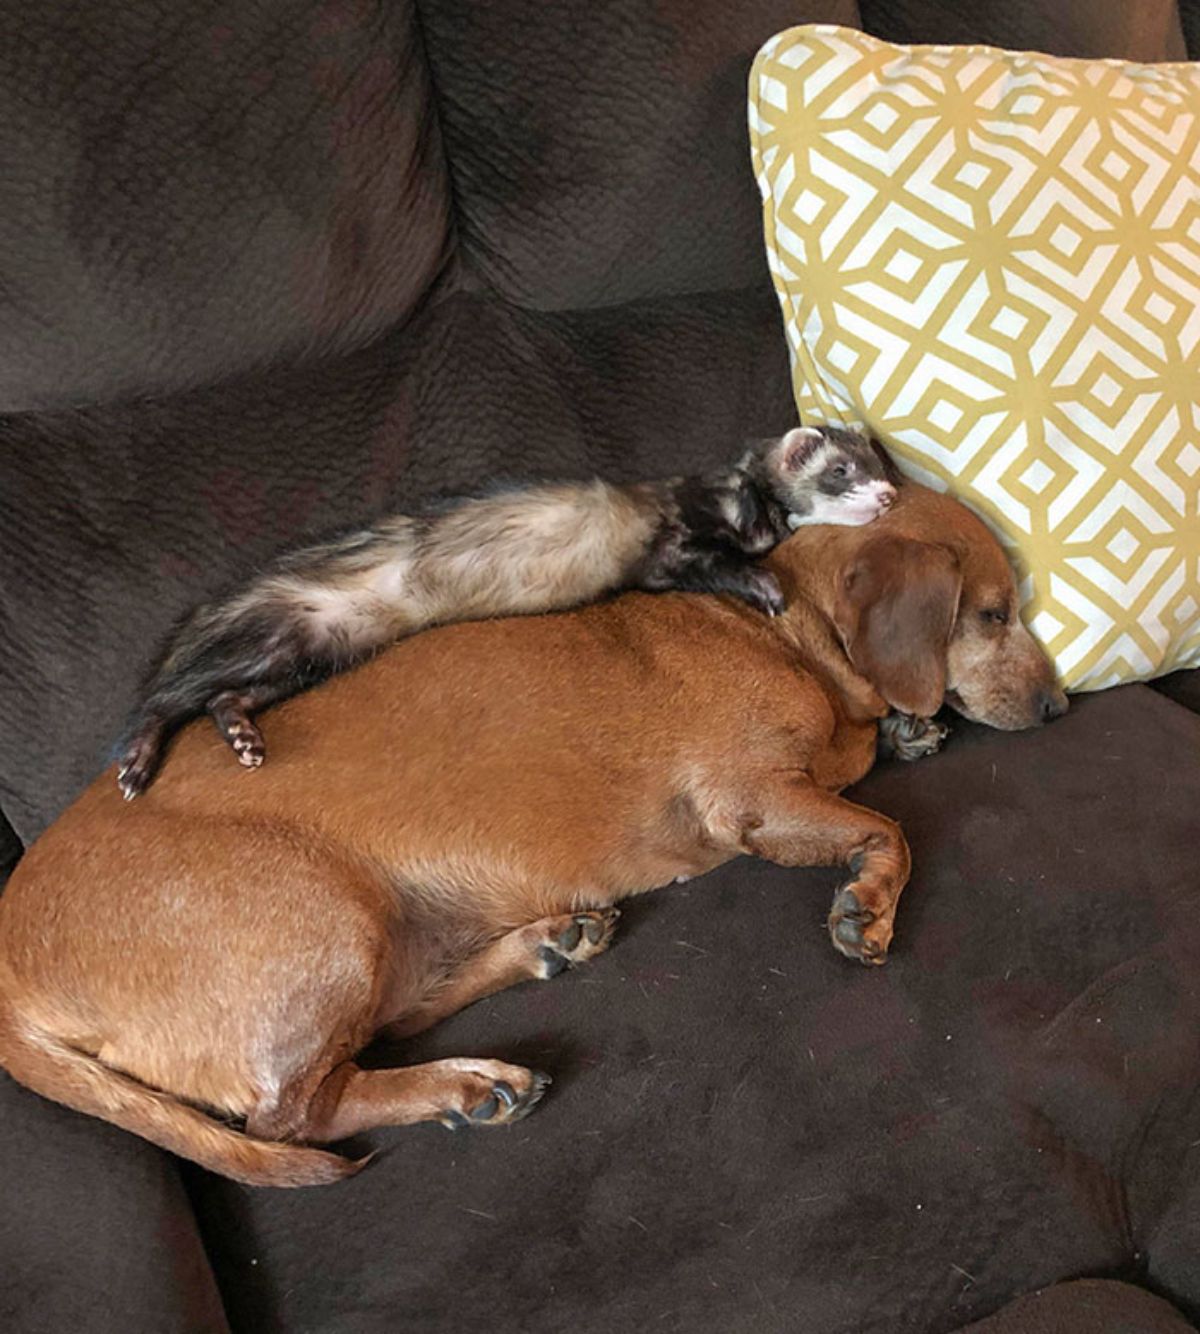 black and brown ferret sleeping on top of a brown dog sleeping on a brown sofa